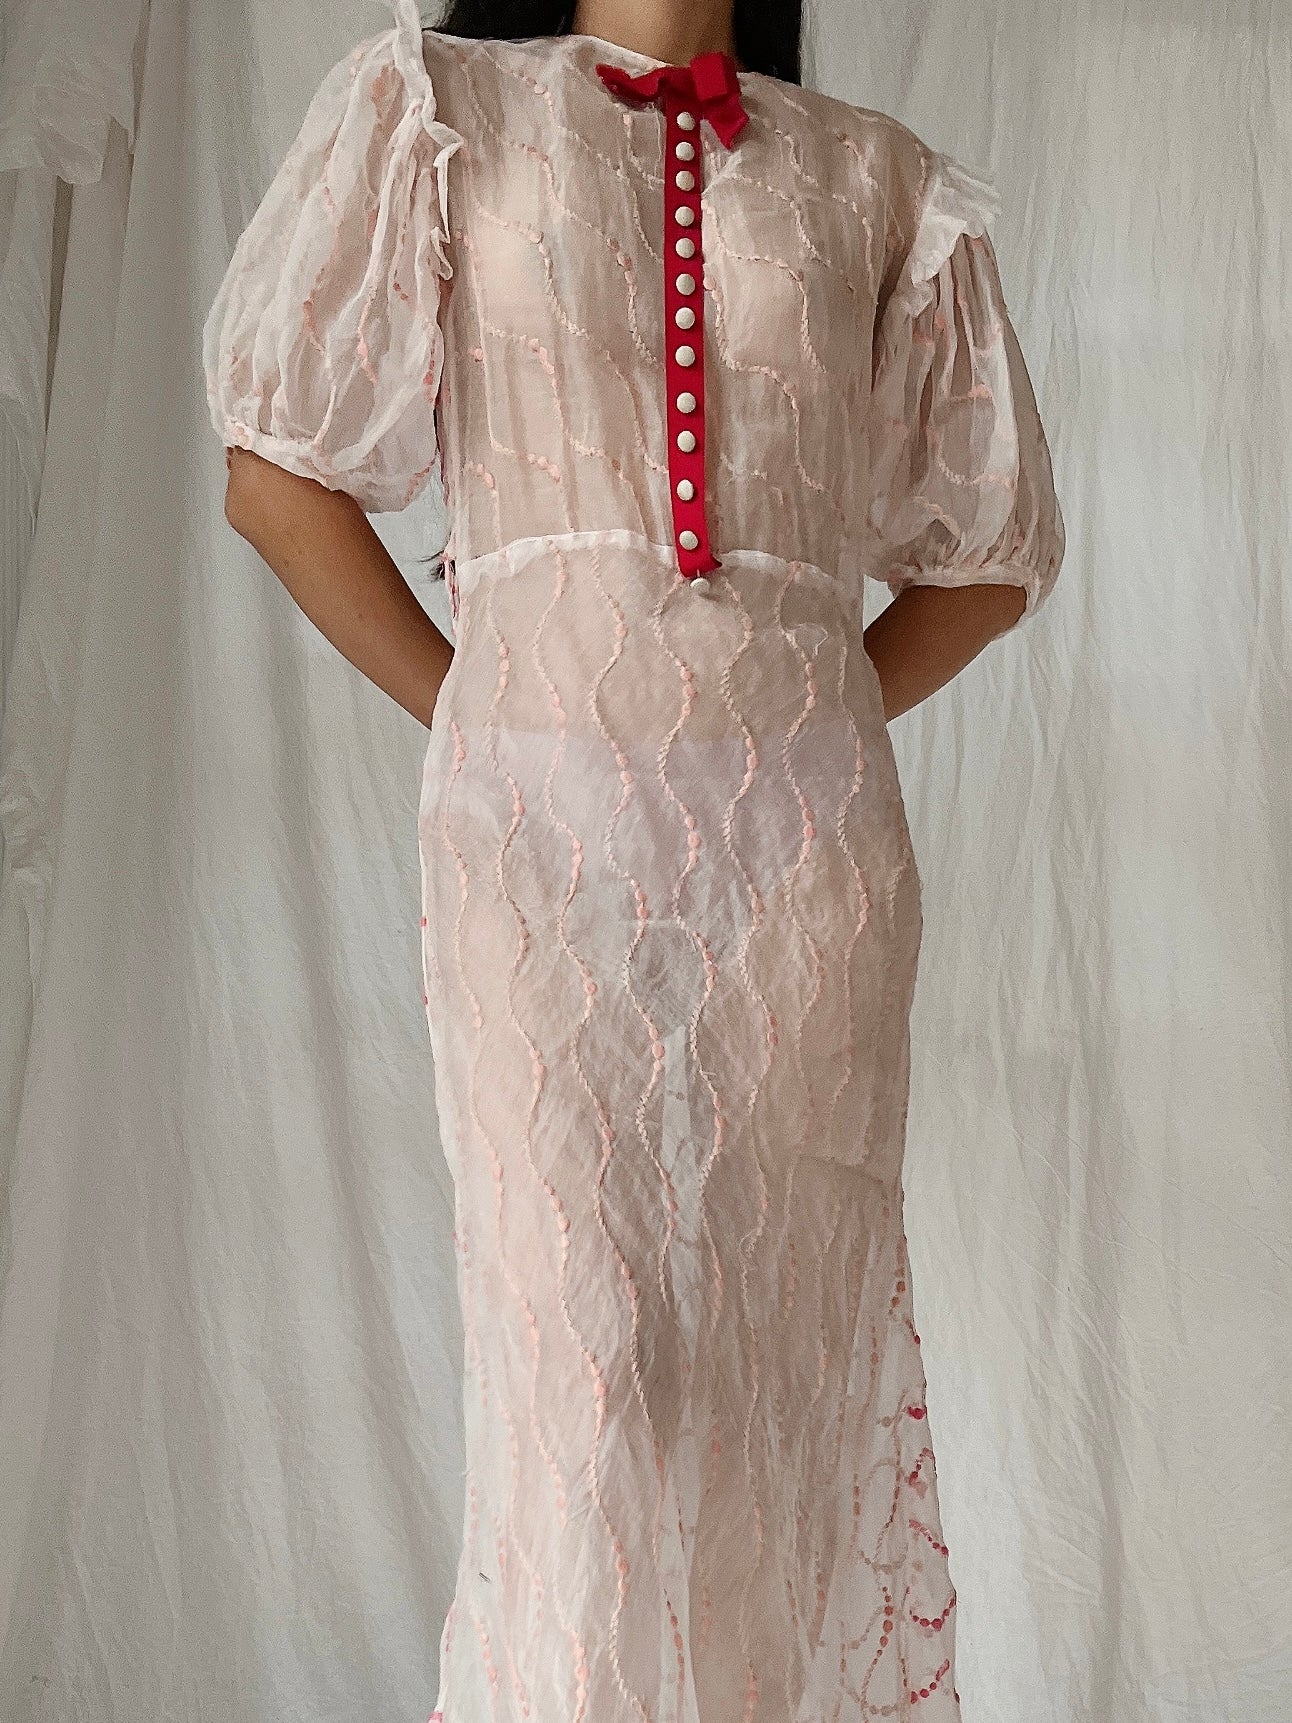 1930s Organdy Embroidered Dress - S